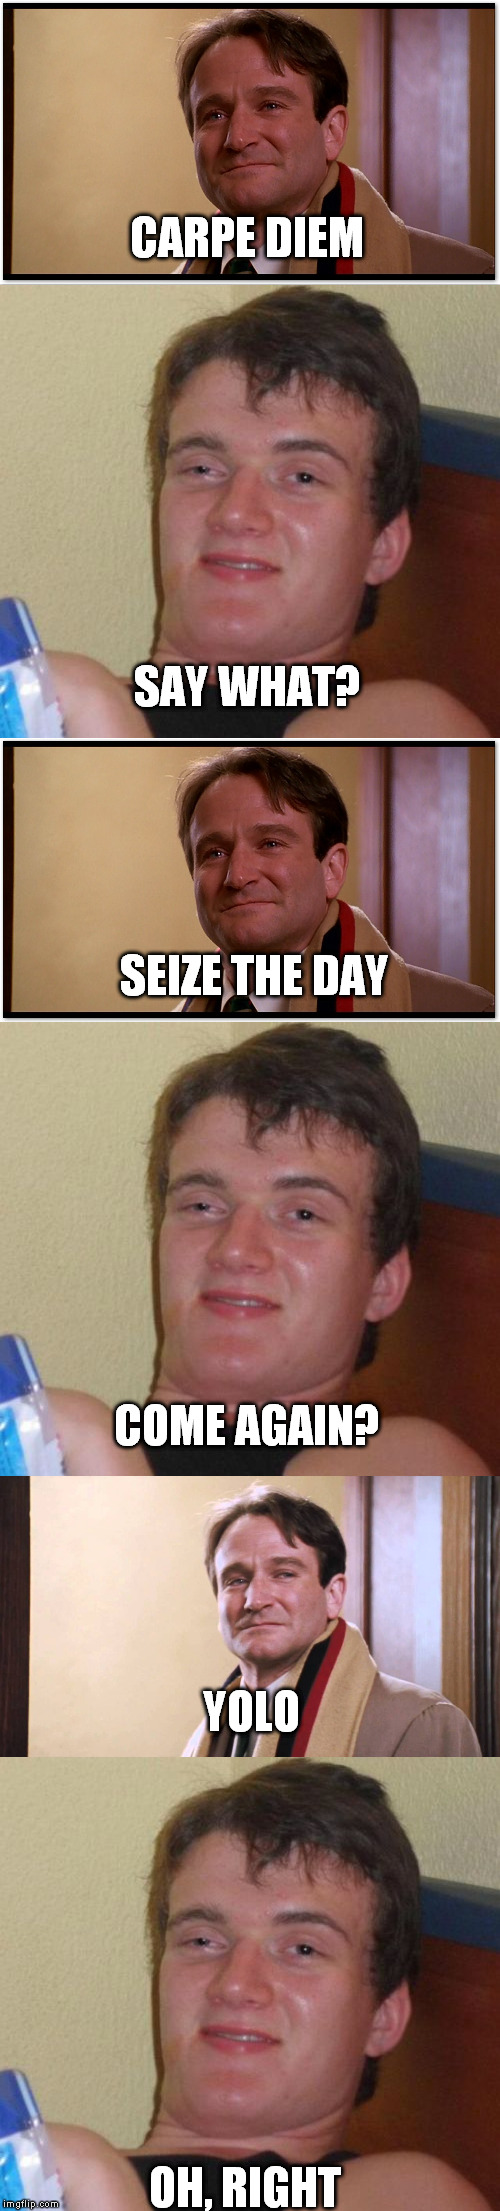 CARPE DIEM | CARPE DIEM; SAY WHAT? SEIZE THE DAY; COME AGAIN? YOLO; OH, RIGHT | image tagged in memes | made w/ Imgflip meme maker